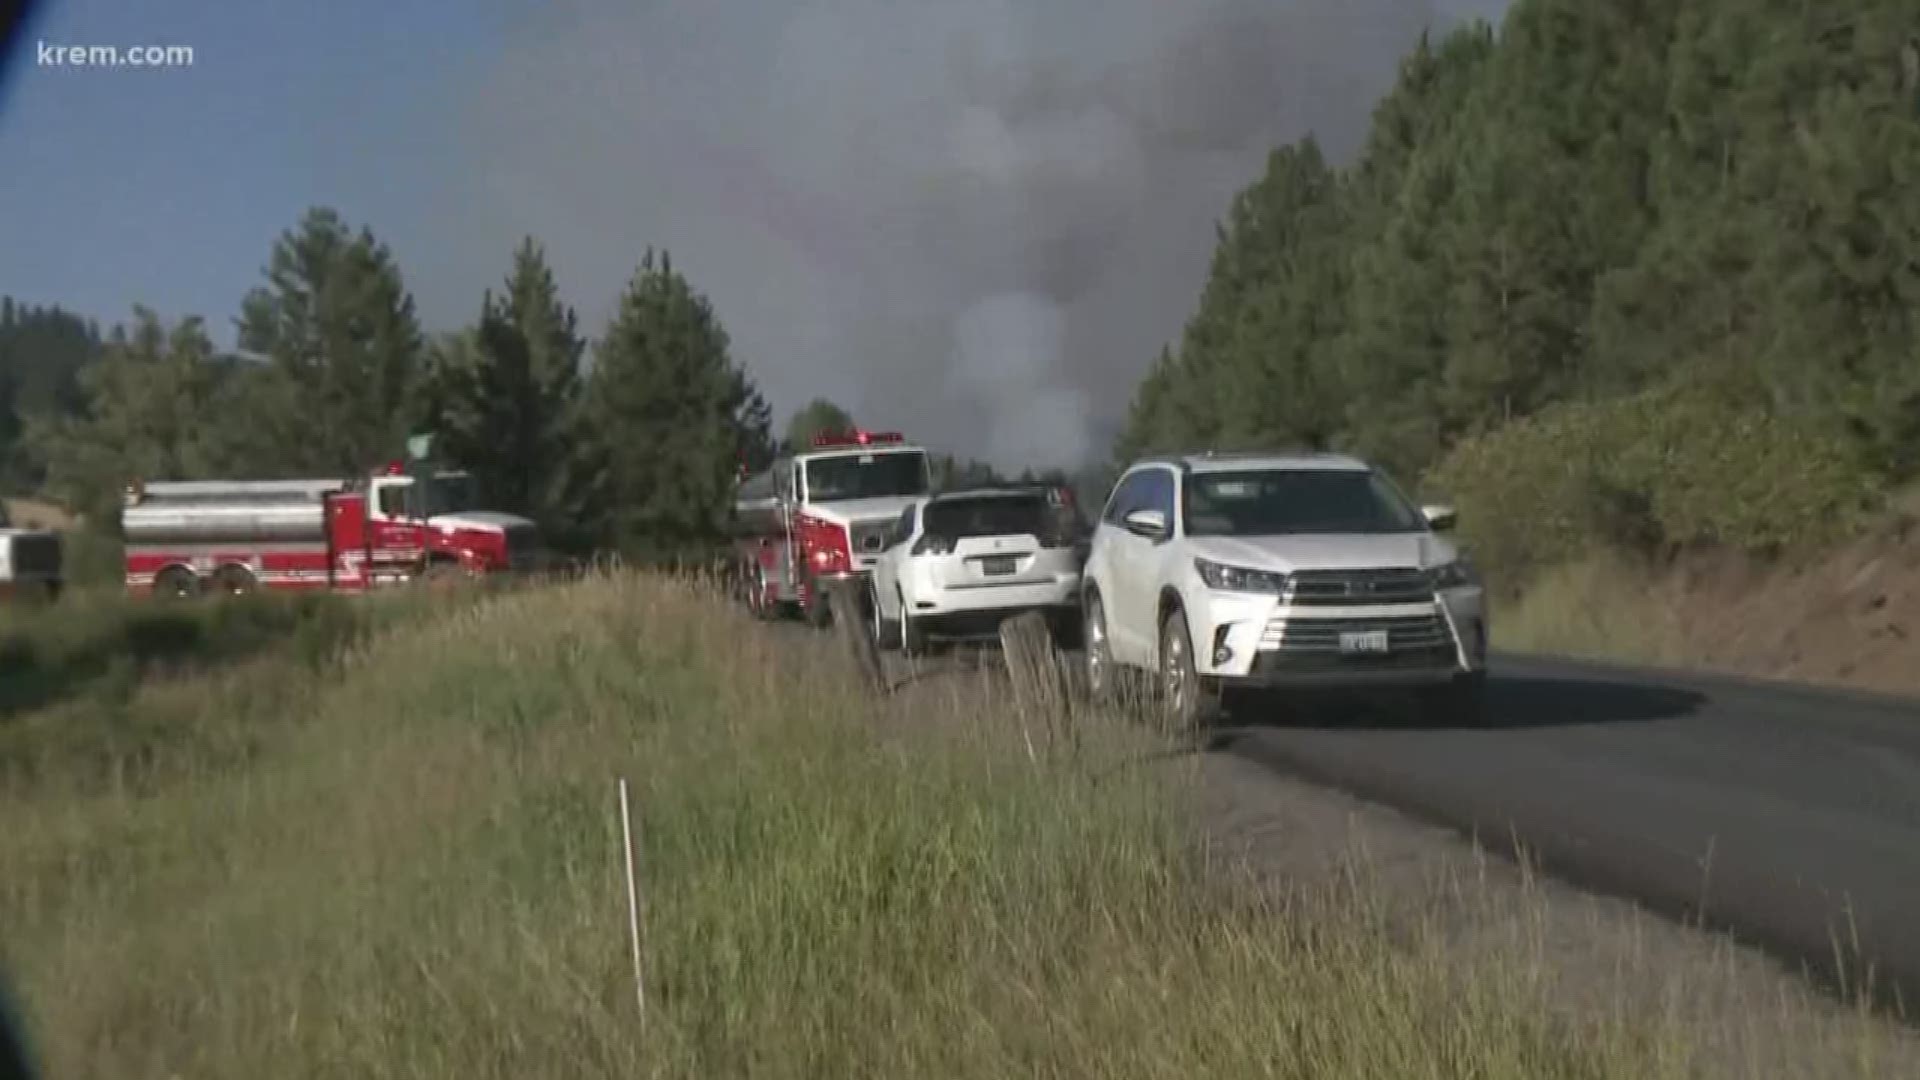 Officials said at 7:30 p.m. on Saturday that the fire was 10 percent contained.